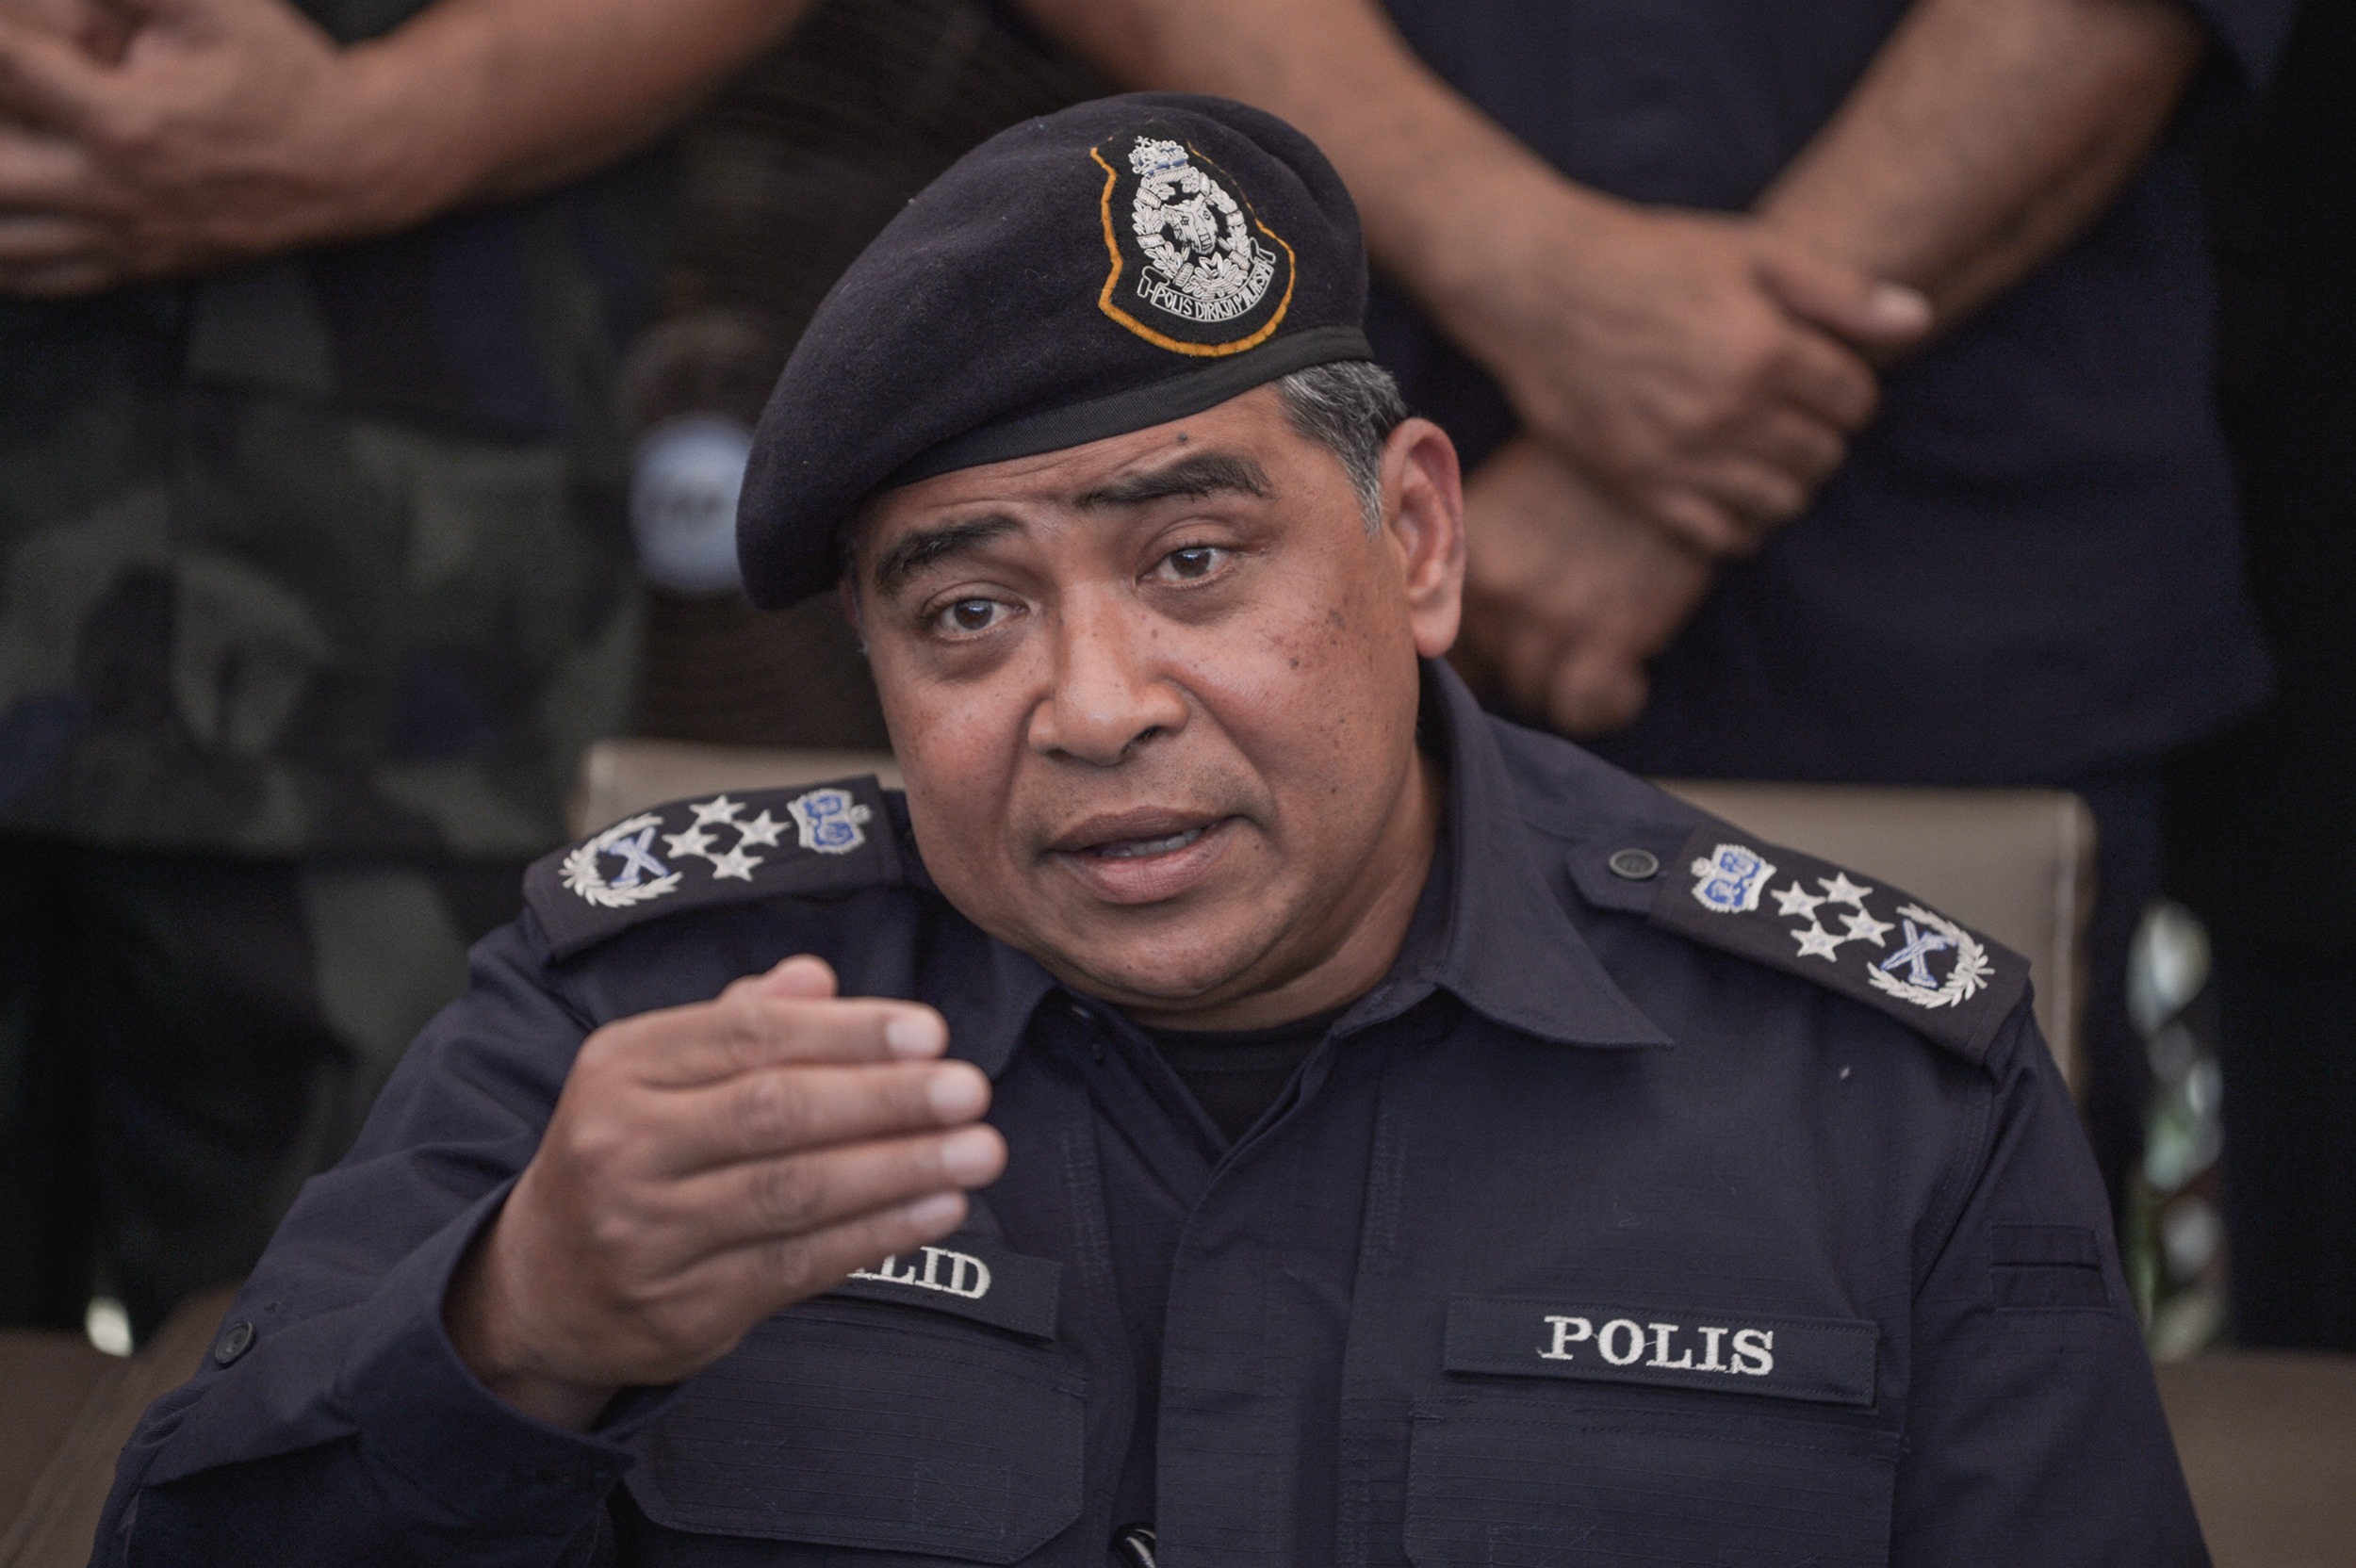 Malaysian national police chief Khalid Abu Bakar speaks during a press conference a day after the government announced the discovery of camps and graves, the first such sites found in Malaysia since a regional human-trafficking crisis erupted earlier this month, near Malaysia-Thailand borders in Wang Kelian on May 25, 2015.  A total of 139 grave sites and 28 human-trafficking camps have been found in a remote northern Malaysian border region, the country's top police official told reporters.       AFP PHOTO / MOHD RASFAN / AFP PHOTO / MOHD RASFAN